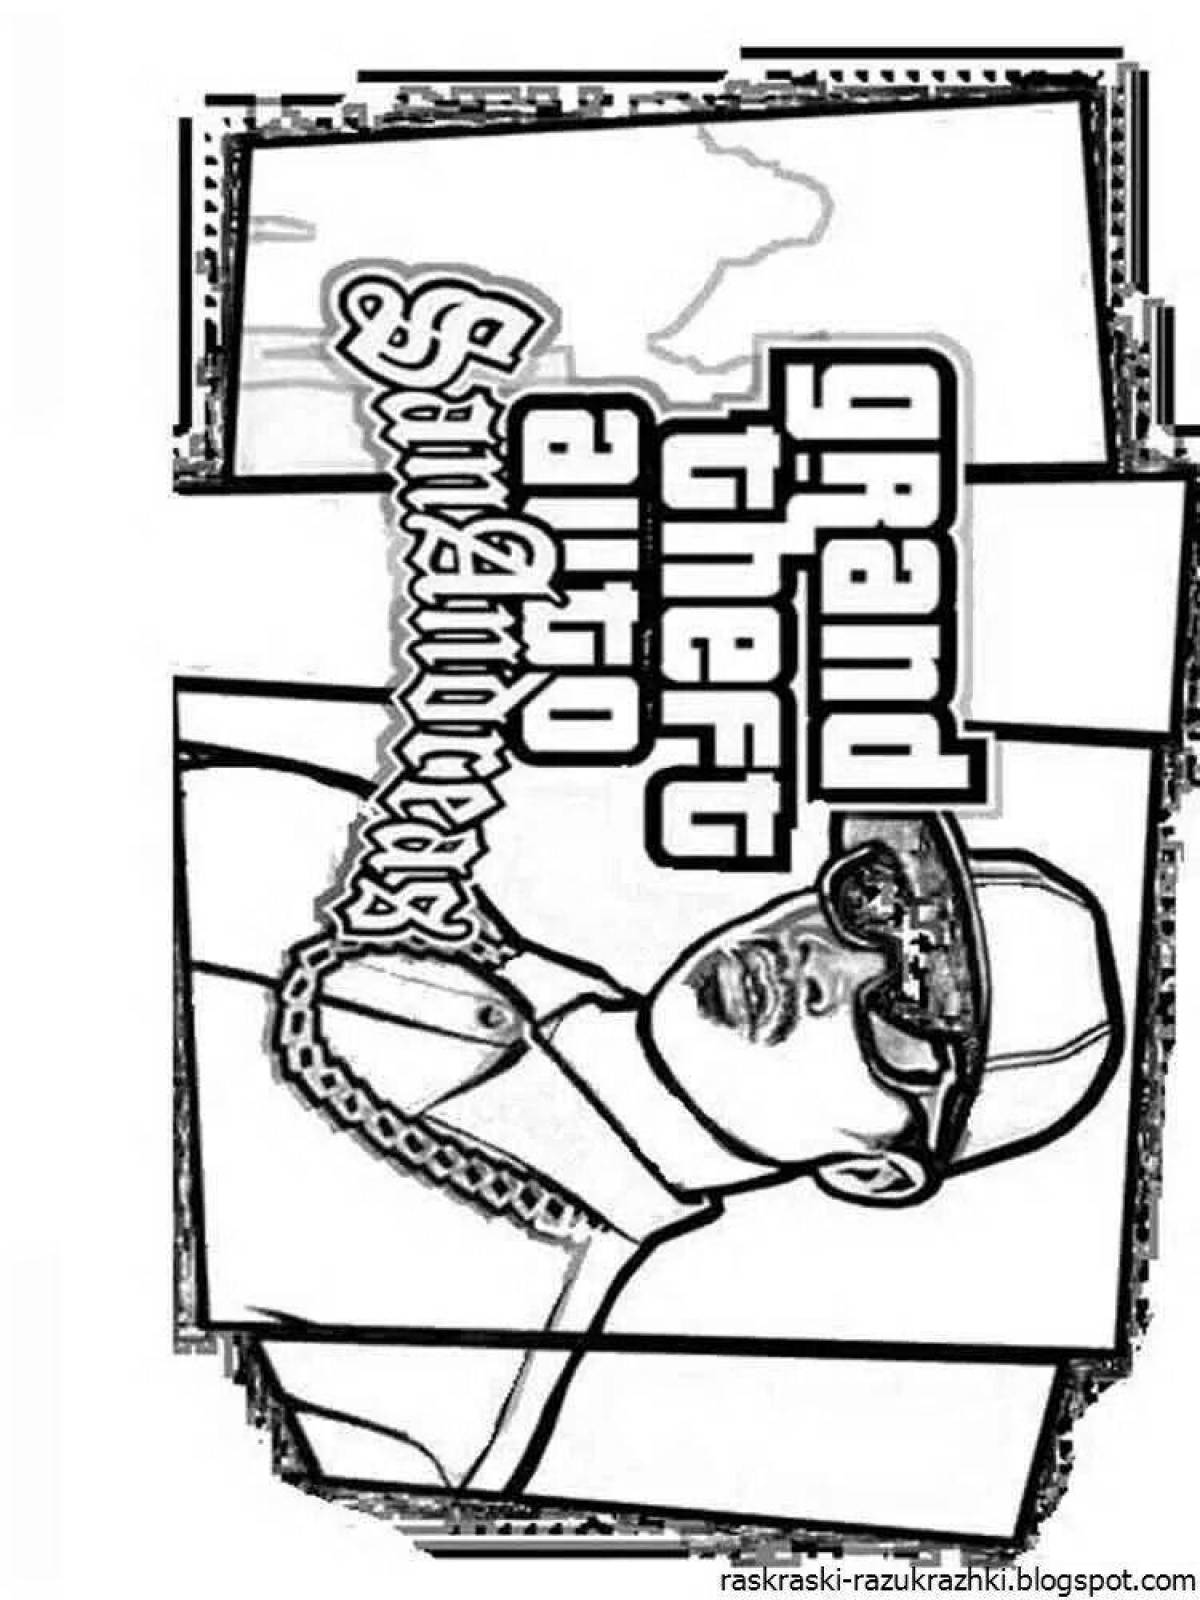 Charming jel from gta 5 coloring book